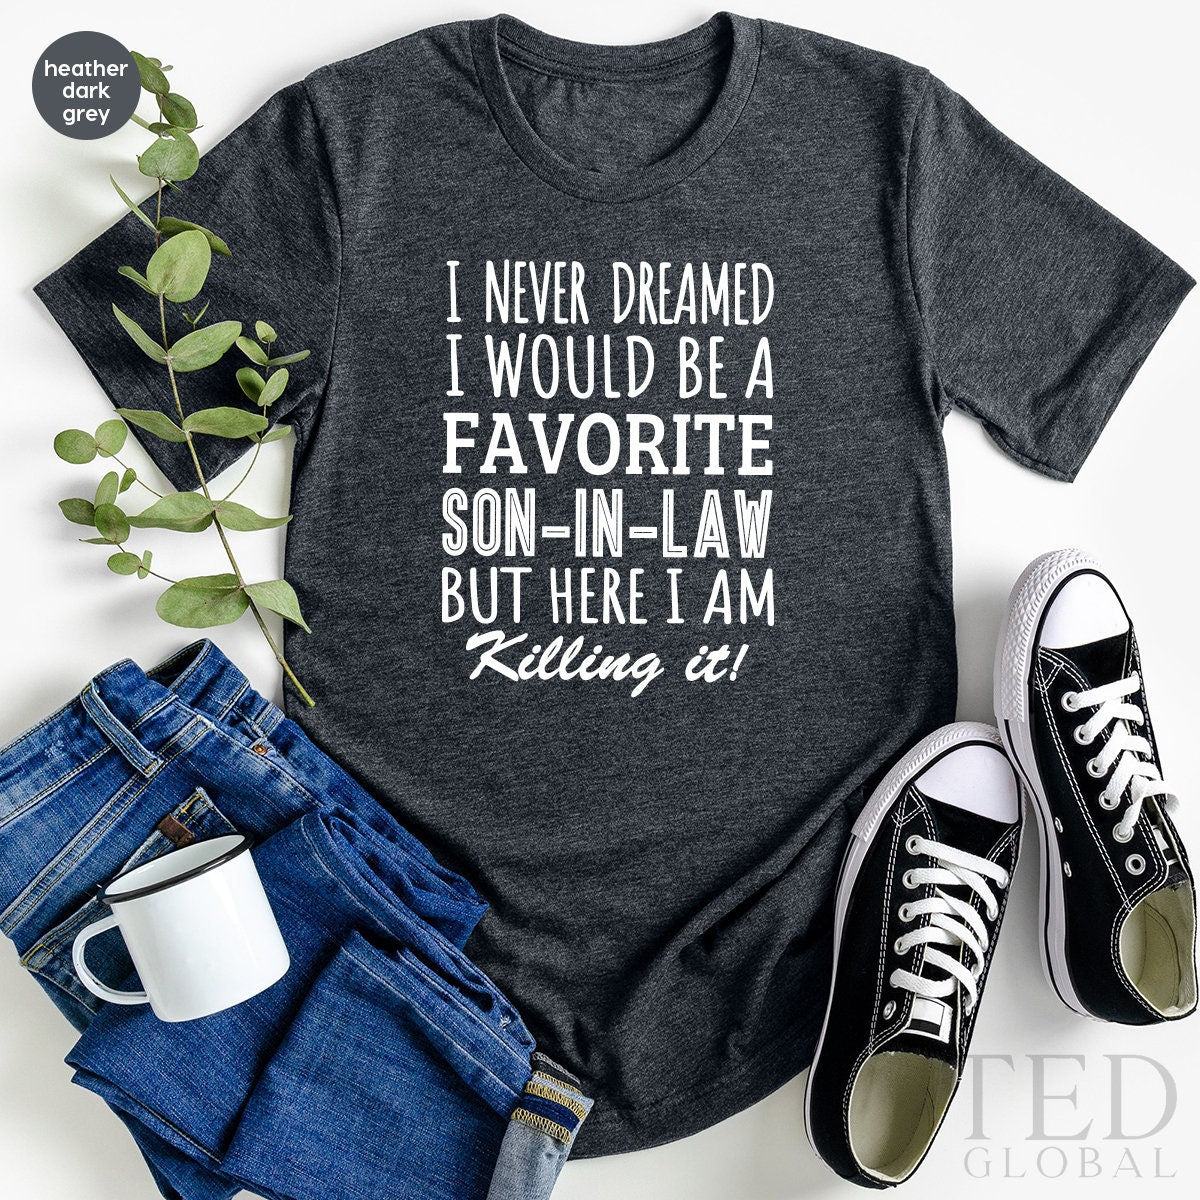 Mother In Law T Shirt, Awesome Family Member T-Shirt,I Never Dreamed, A Favorite Son-In-Law But Here I Am Killing It Shirt, Son In Law Gift - Fastdeliverytees.com